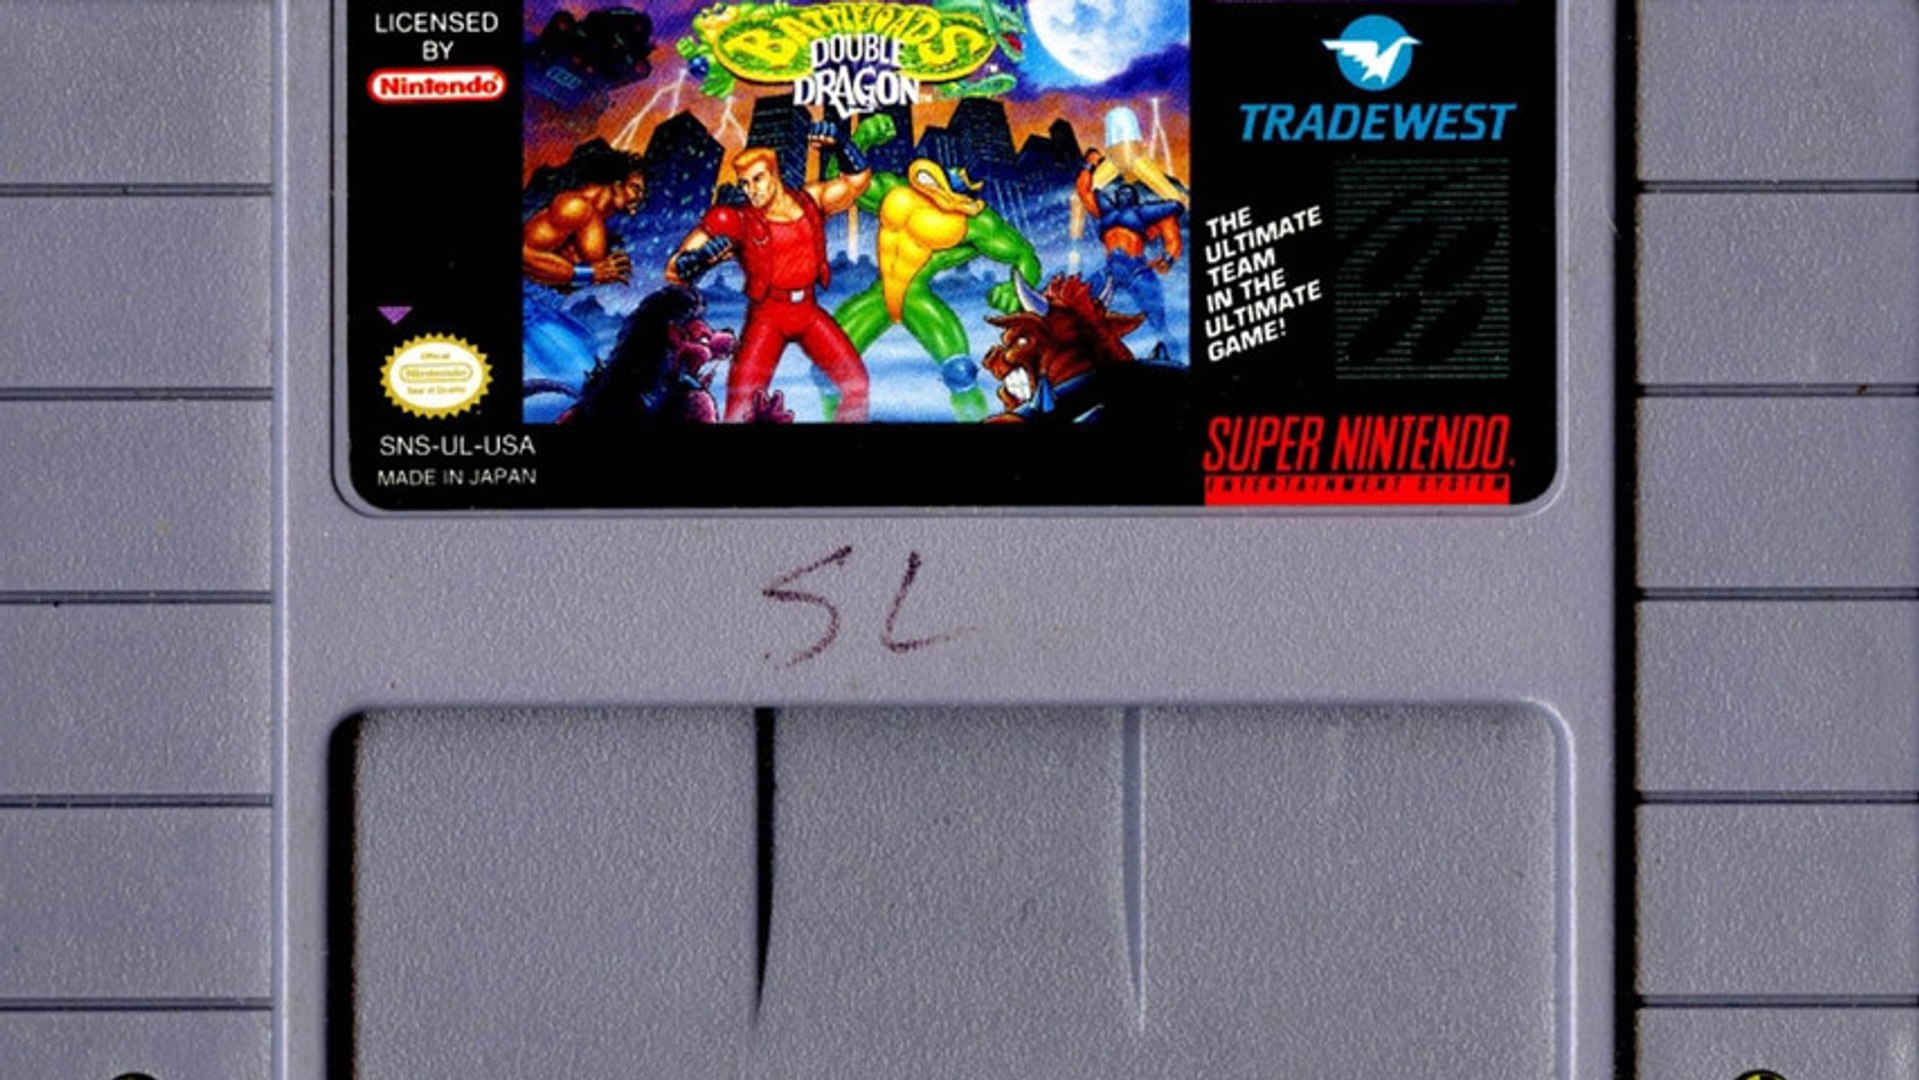 Battletoads Double Dragon: The Ultimate Team (SNES) - The Cutting Room Floor